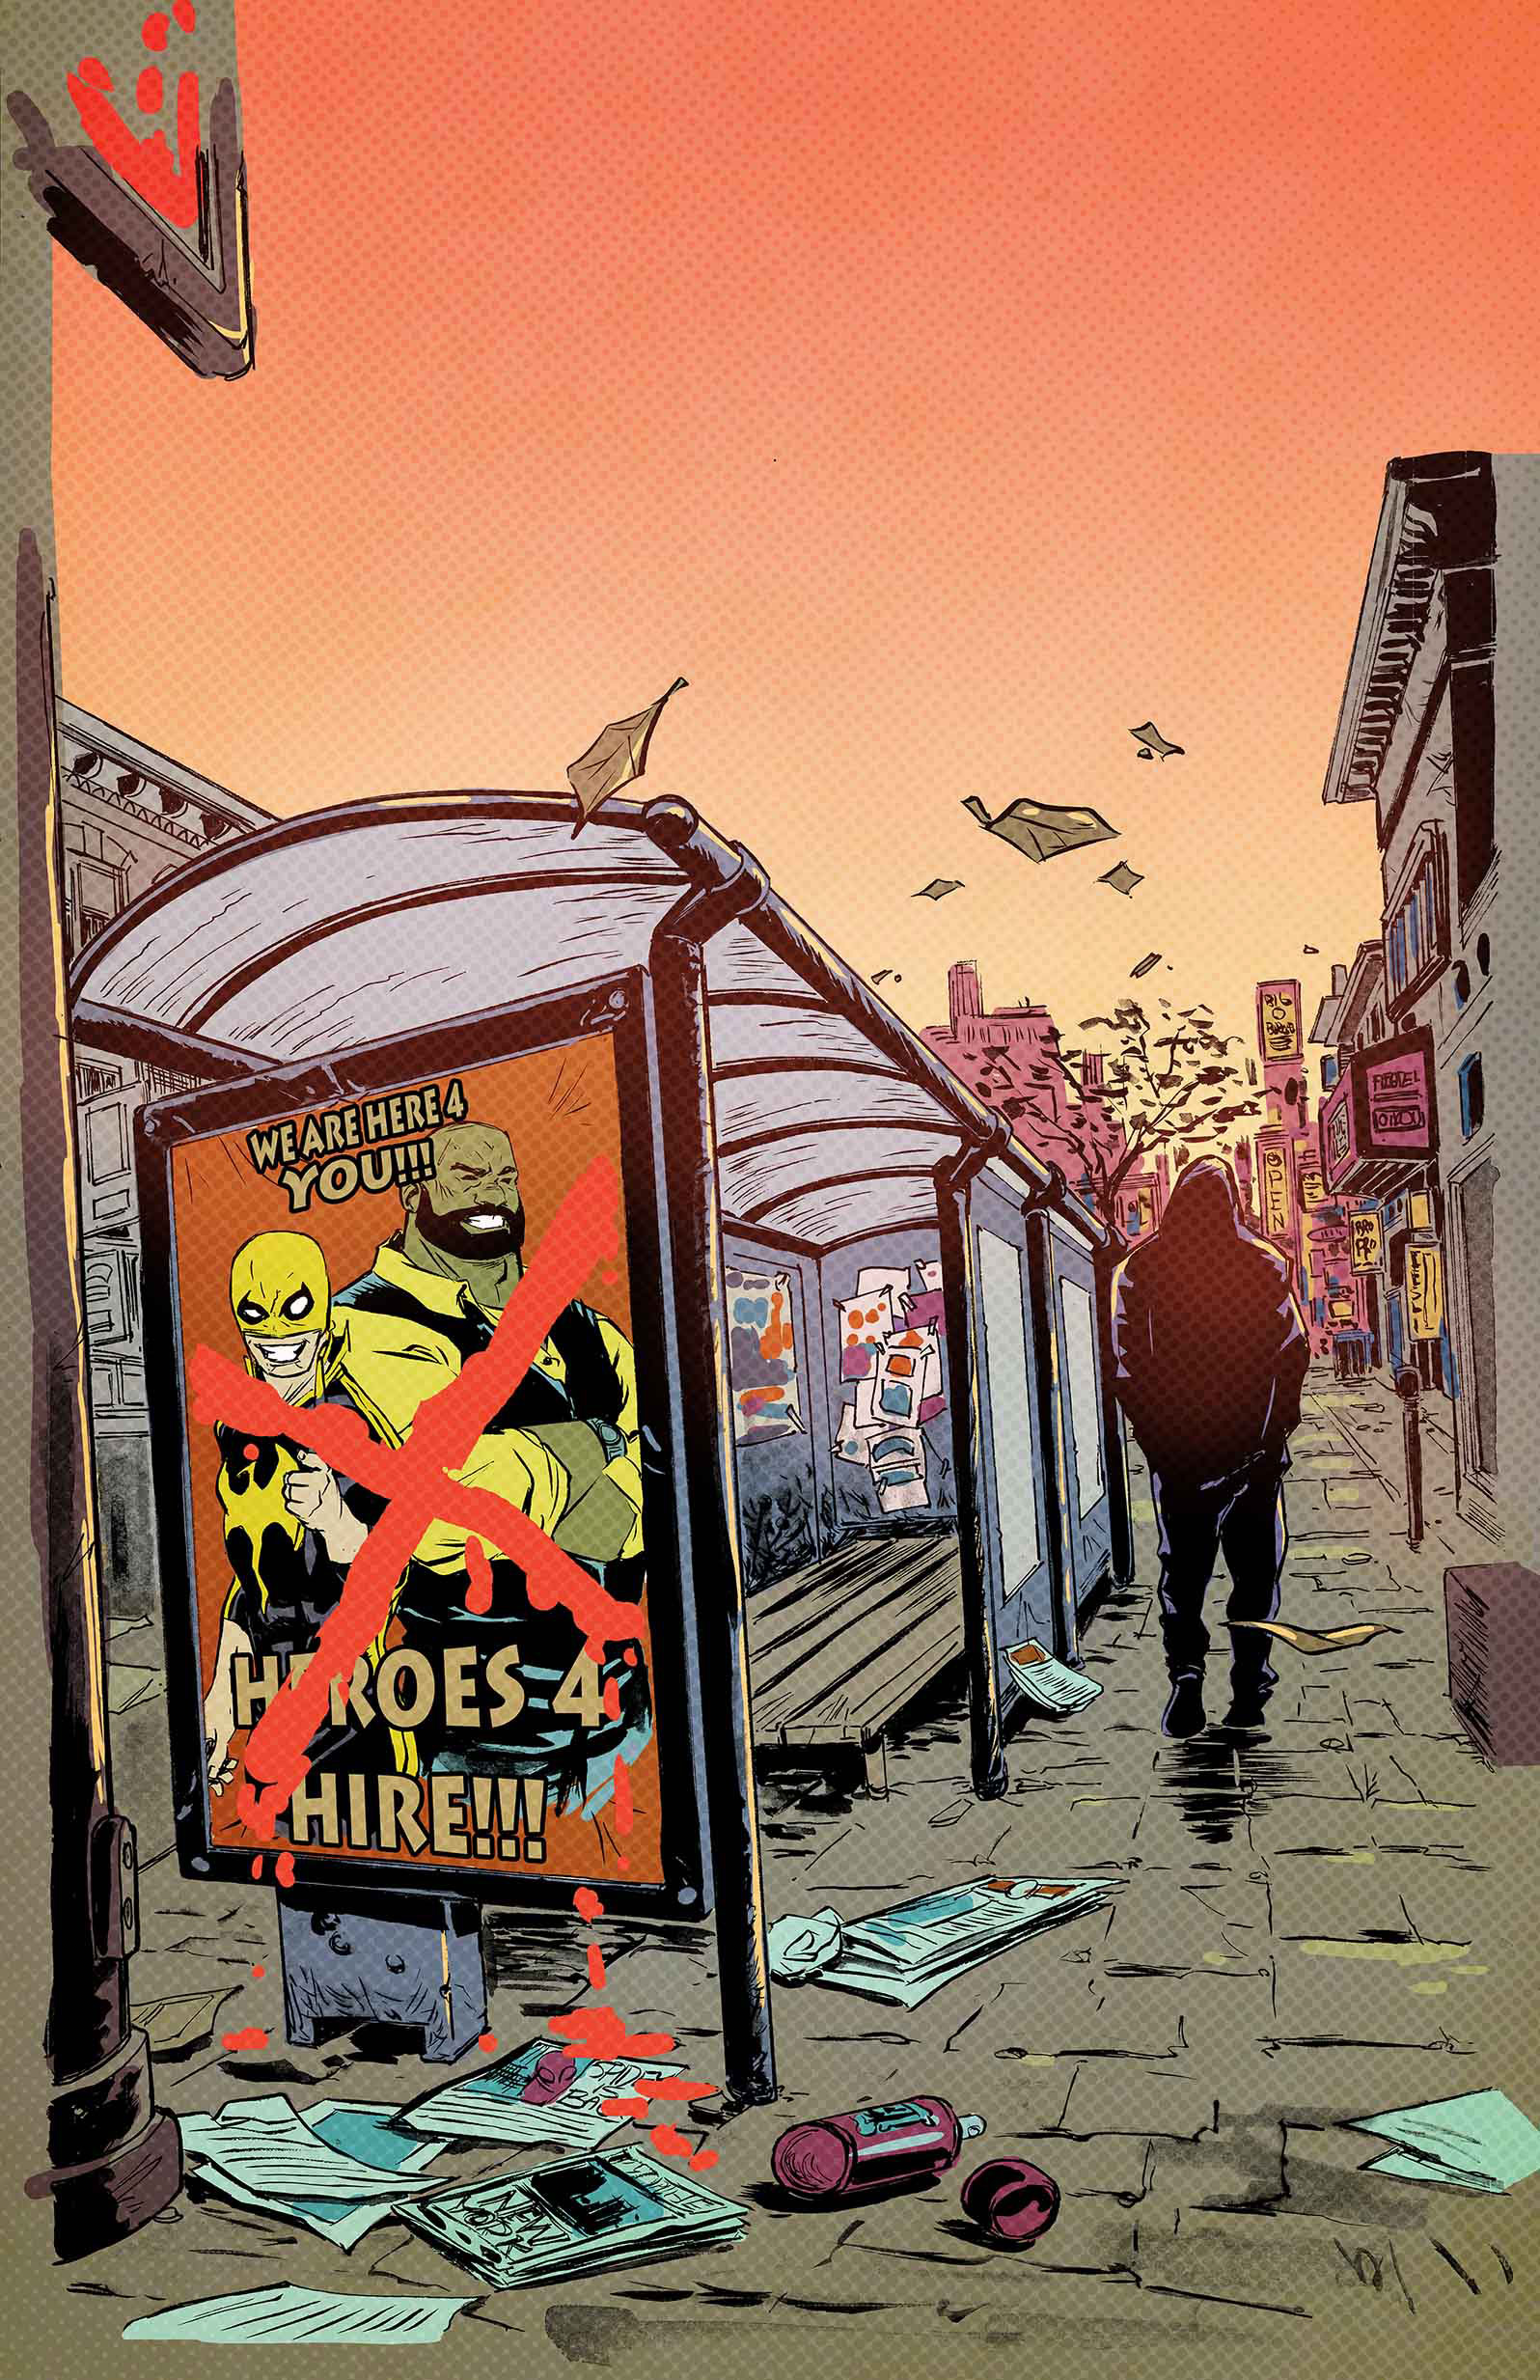 POWER MAN AND IRON FIST #11